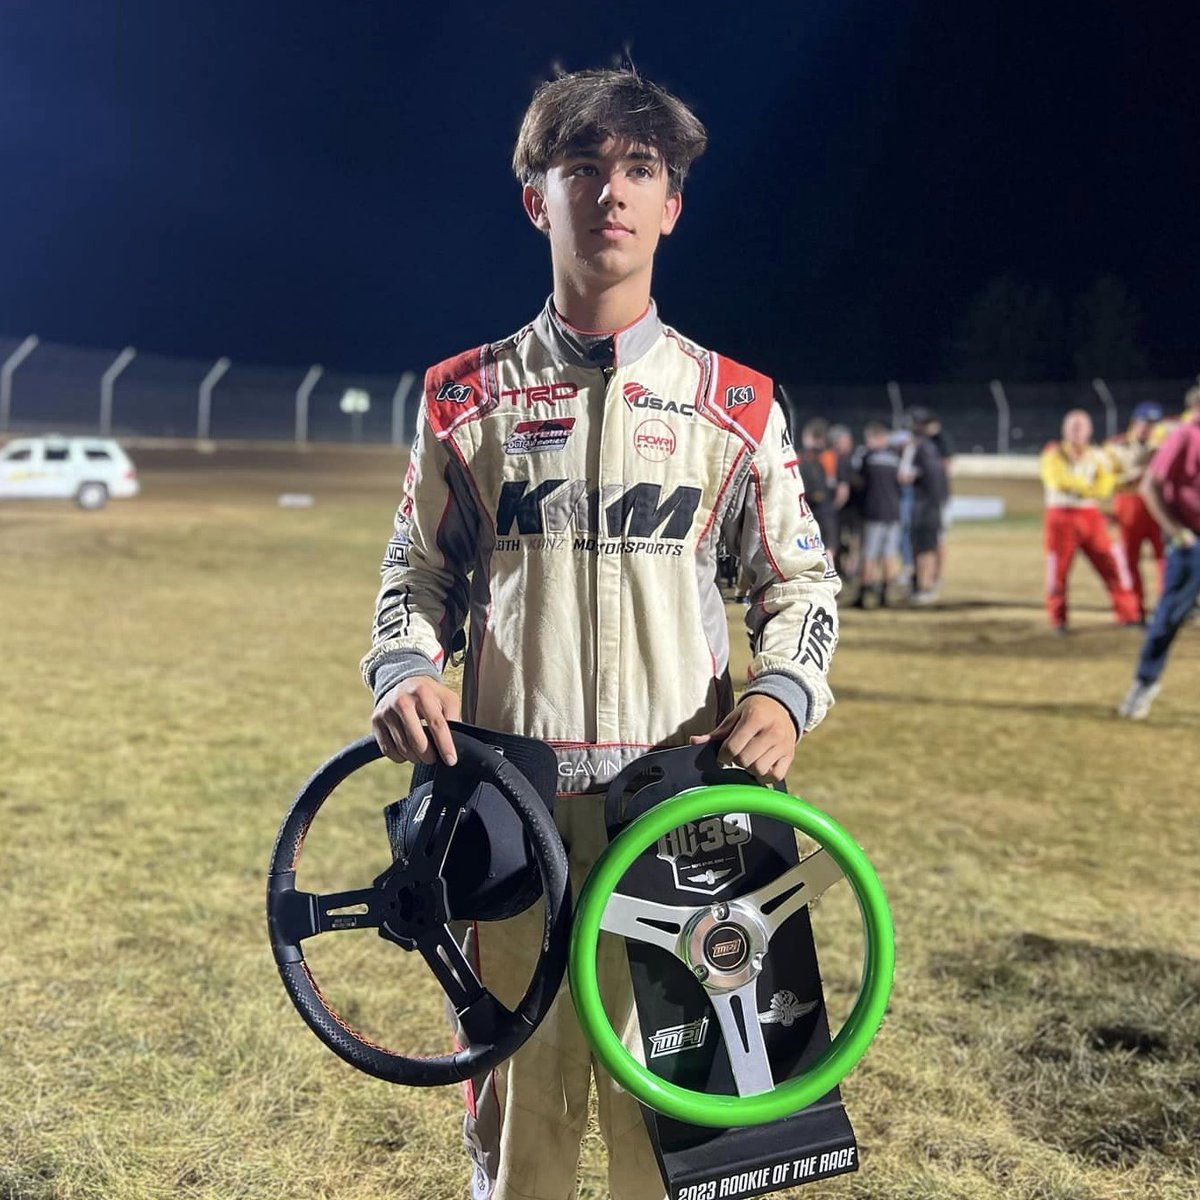 Top Rookie! 👏 In the field of 71 @Driven2Save #BC39 entries this weekend, @Gavin_Miller97 was the best of them all. He captures the 2023 #BC39 @MPI_INNOVATIONS Rookie of the Race award. His rewards include a custom trophy, a custom BC39 MPI steering wheel & $700.